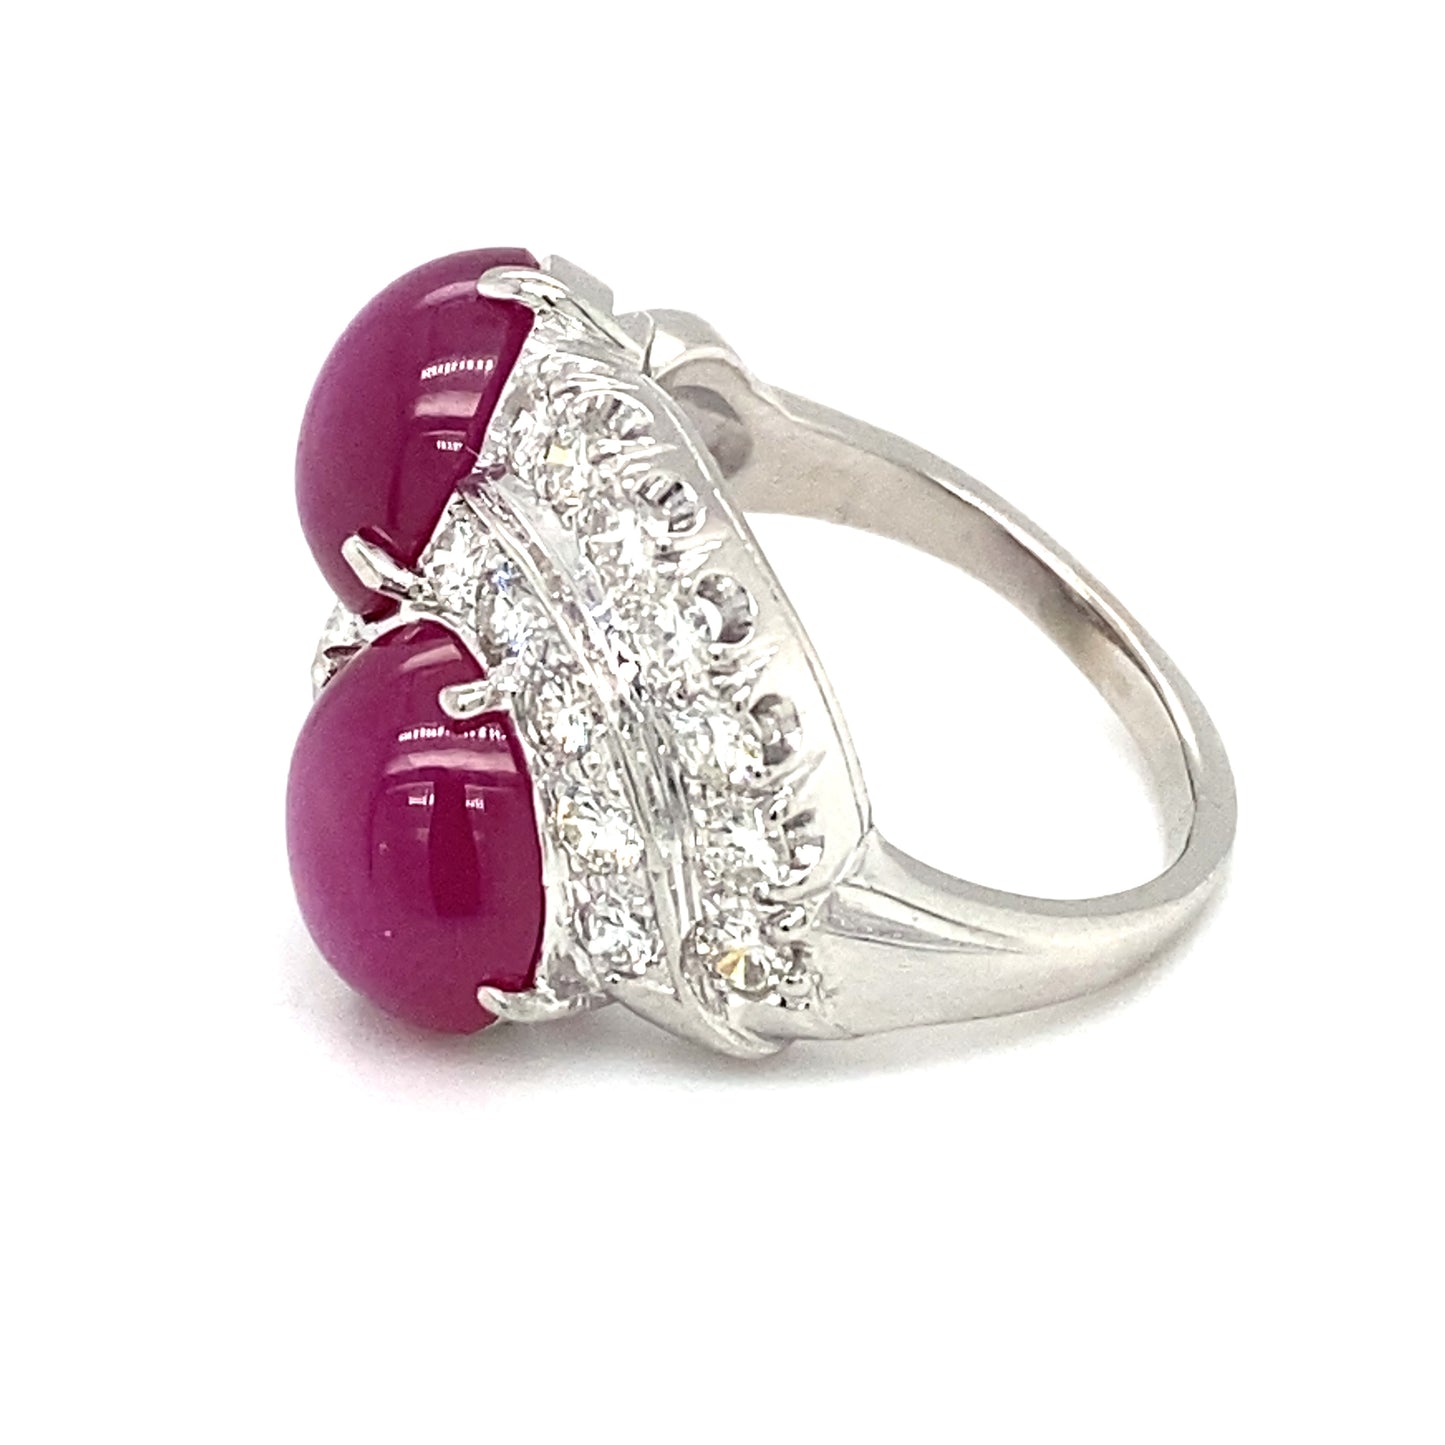 Circa 1940s Toi et Moi Star Ruby and Diamond Ring in Platinum